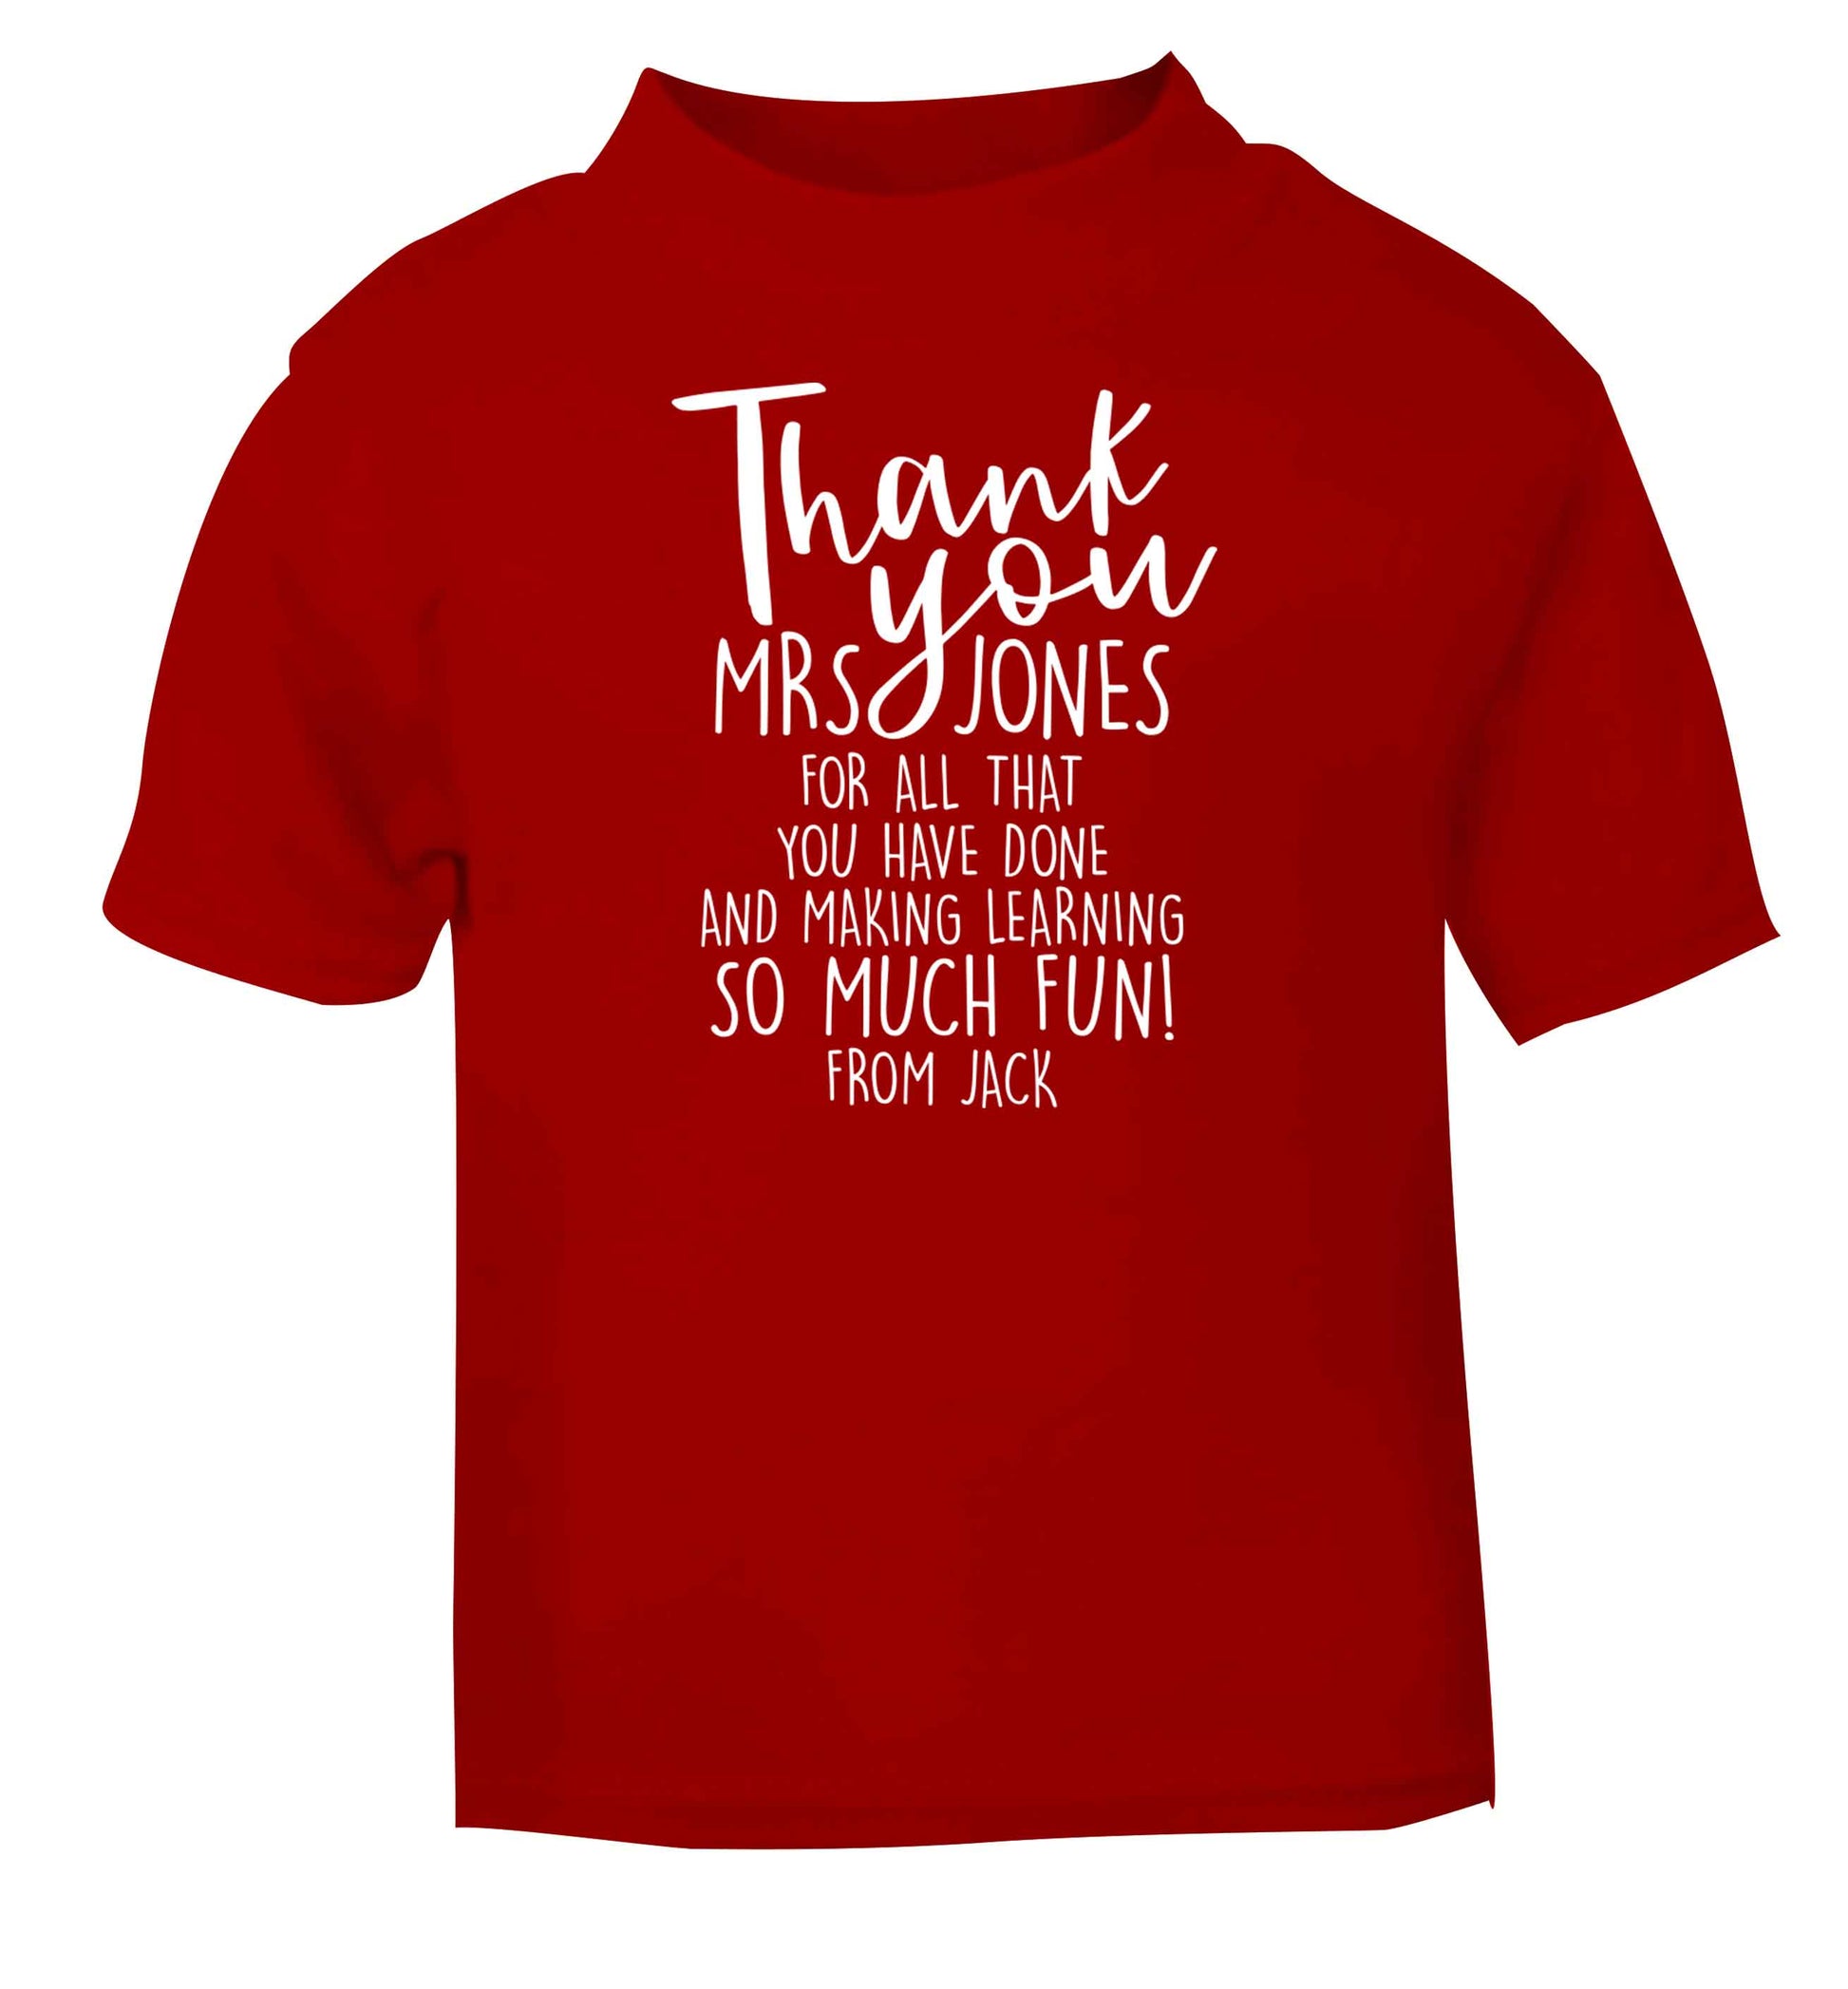 Personalised thank you teacher for all that you've done and making learning so much fun red baby toddler Tshirt 2 Years